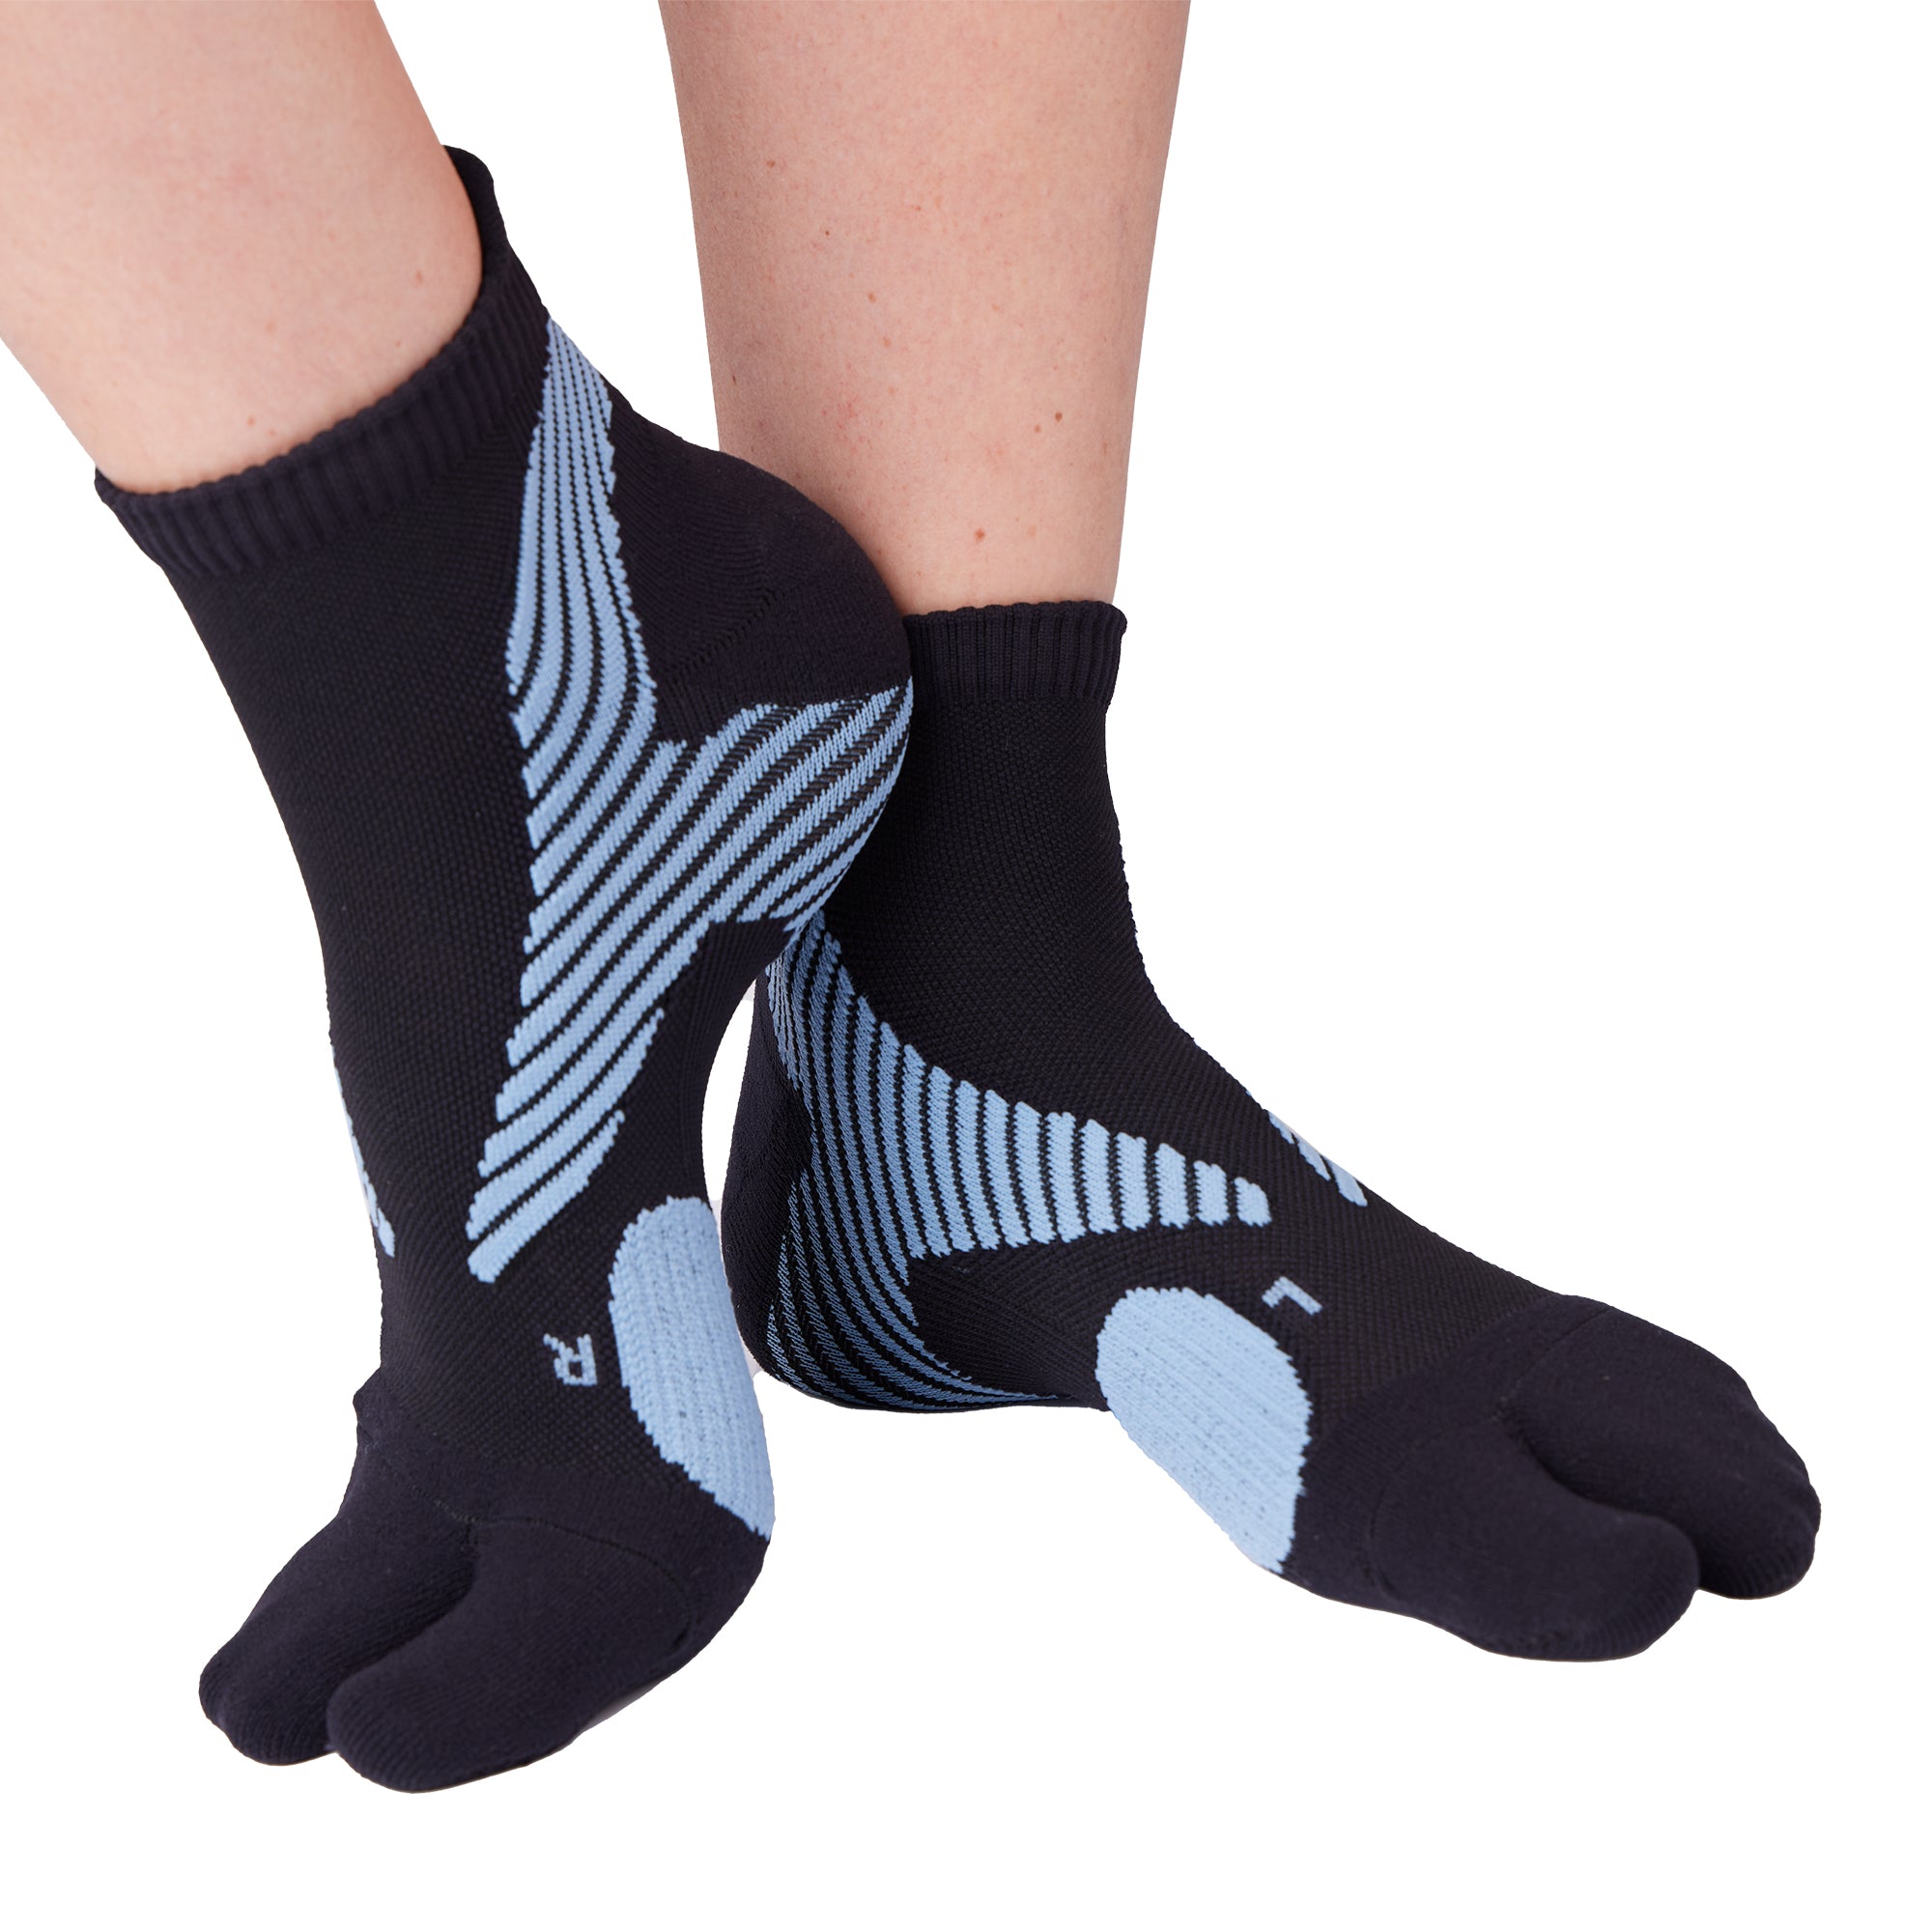 Soft Cotton Blend Small No Show Socks - 3 Pair Pack